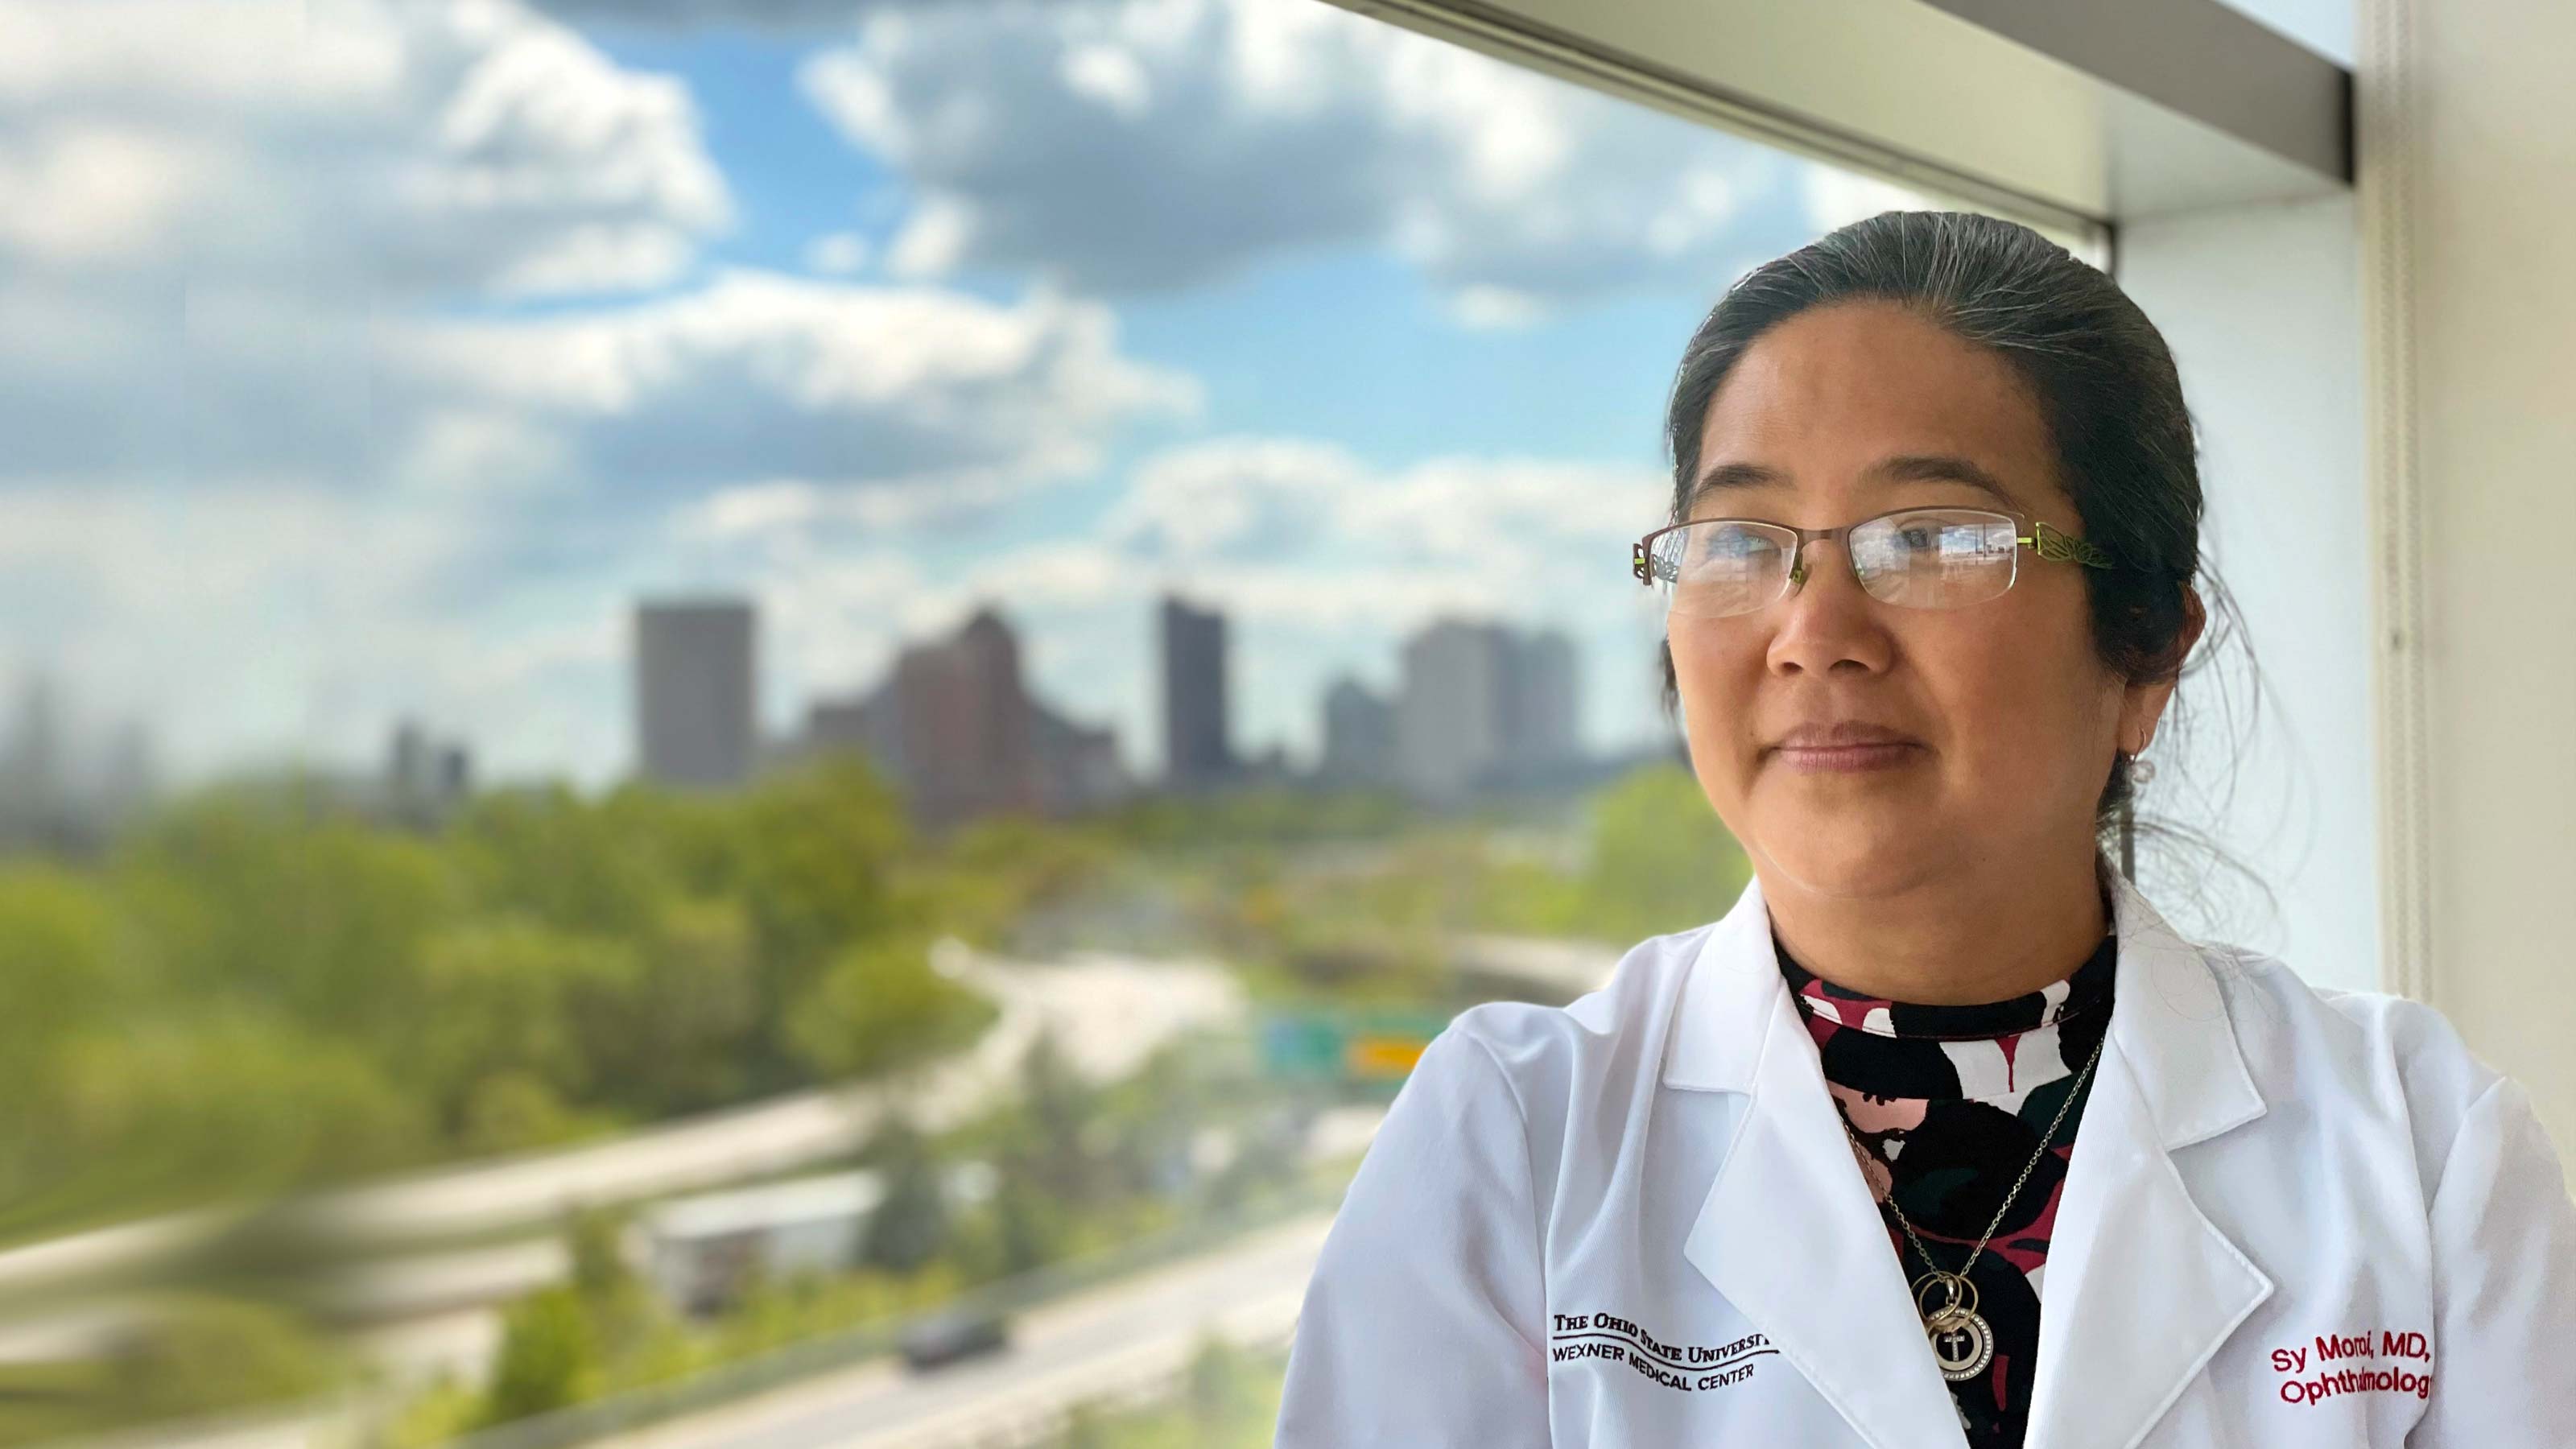 Inspired by her father’s battle, physician-scientist determined to stop glaucoma